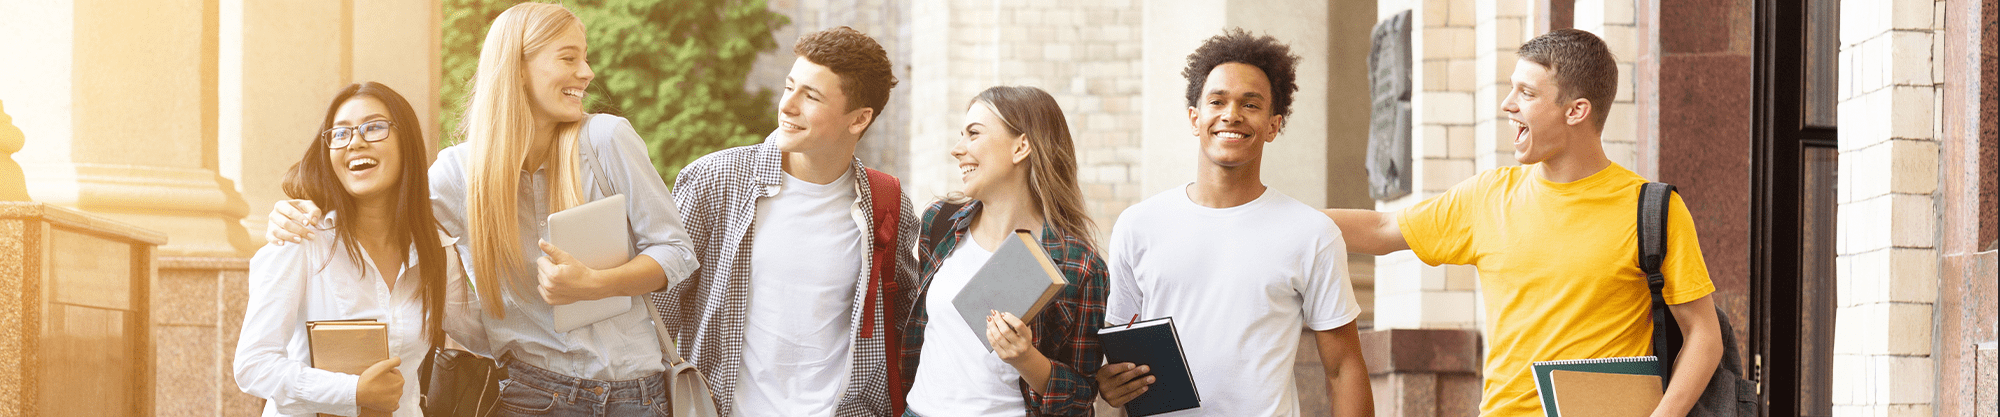 group of high school students laughing as they walk outside